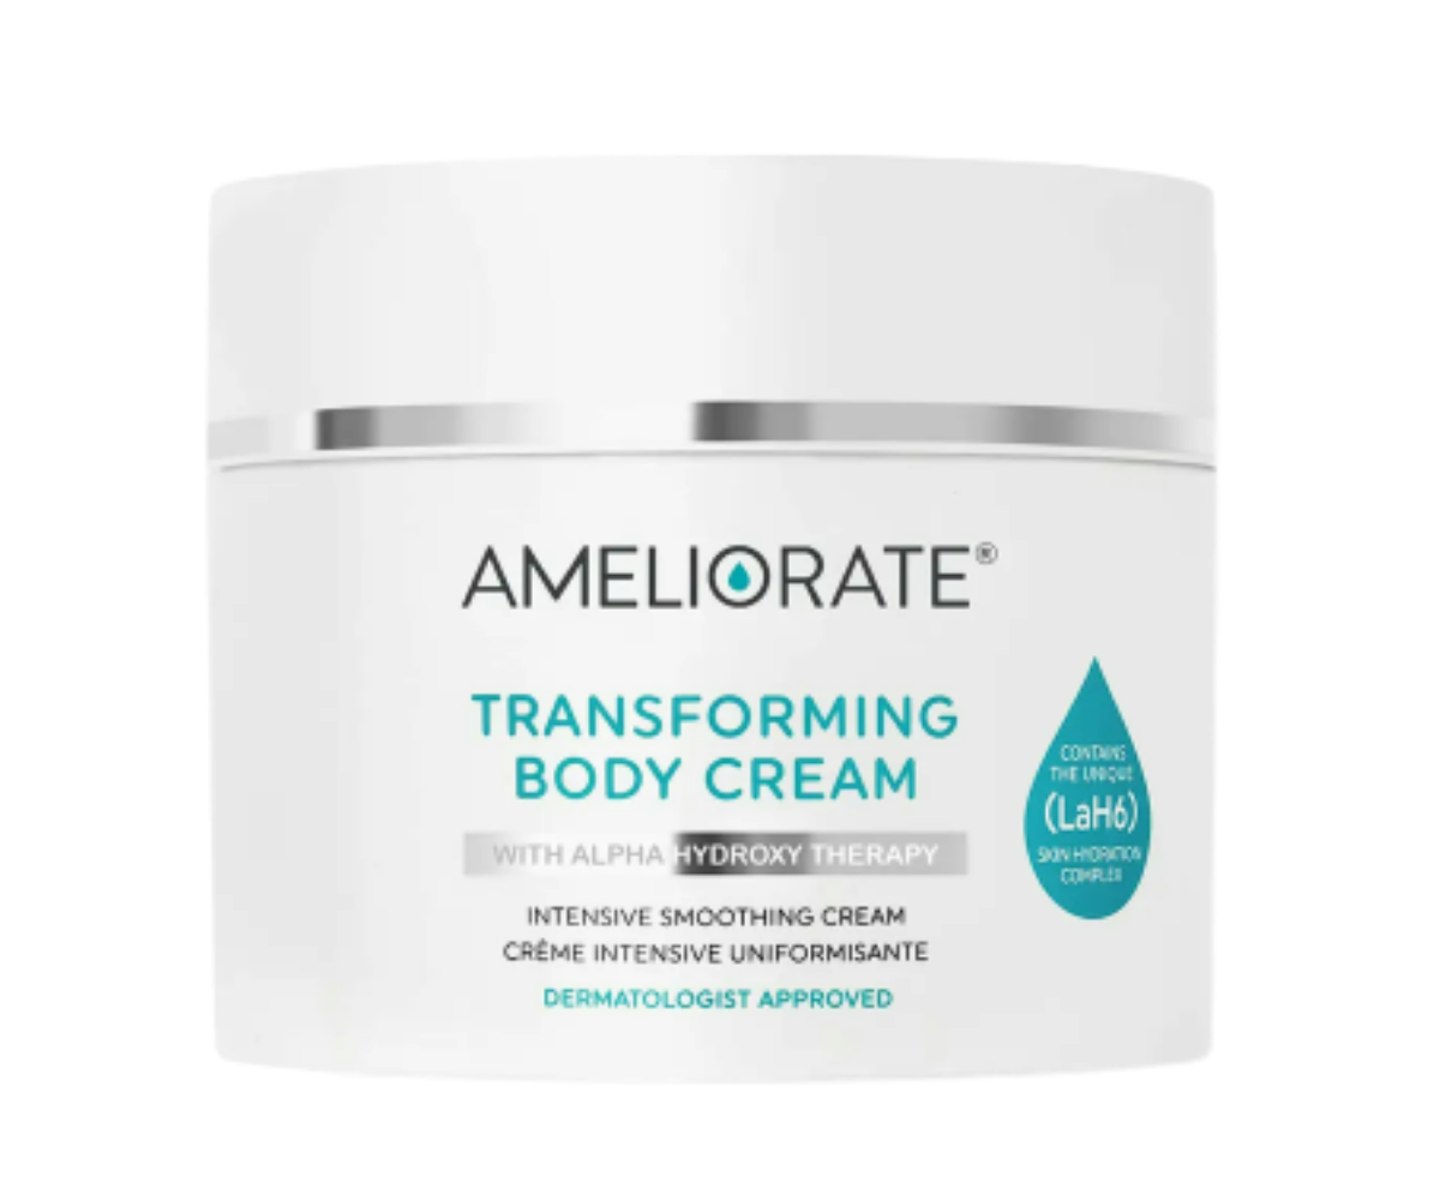 A picture of the Ameliorate Transforming Body Cream